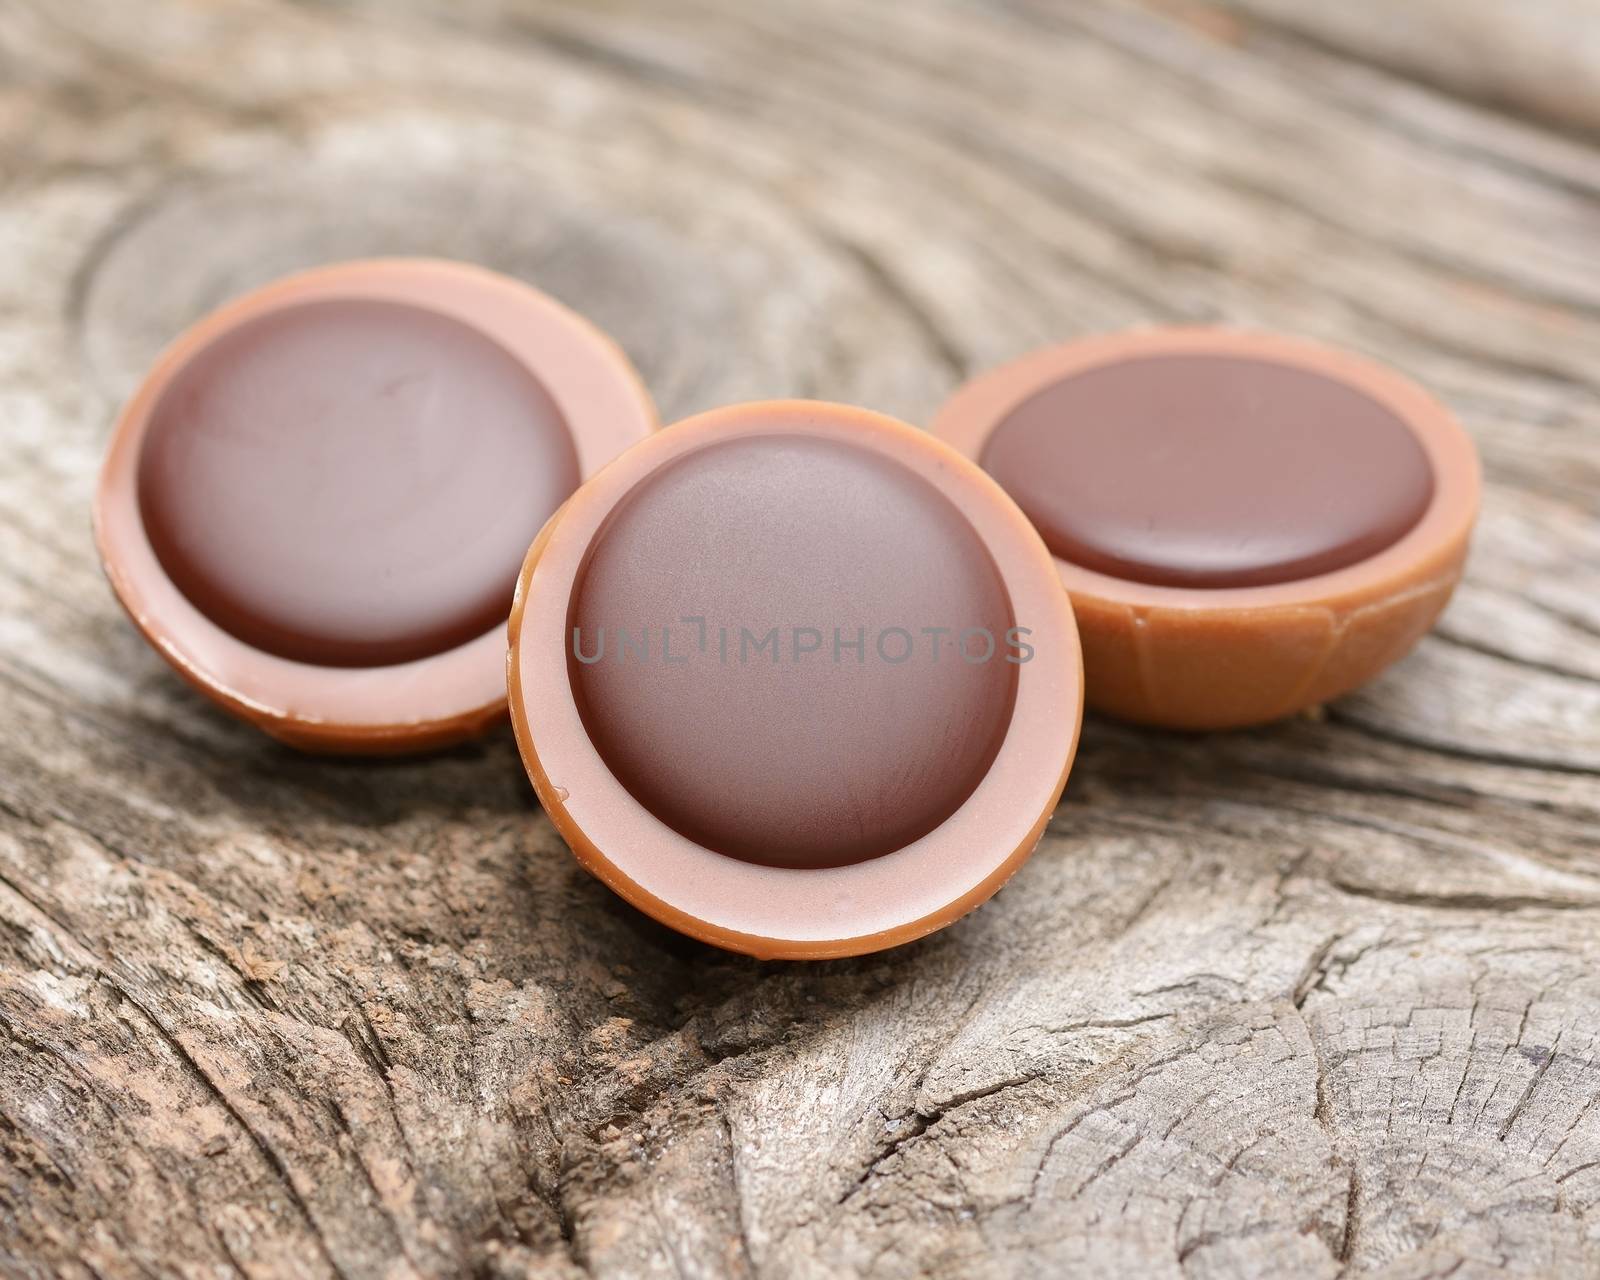 A hazelnut in caramel with creamy nougat and chocolate on wooden background